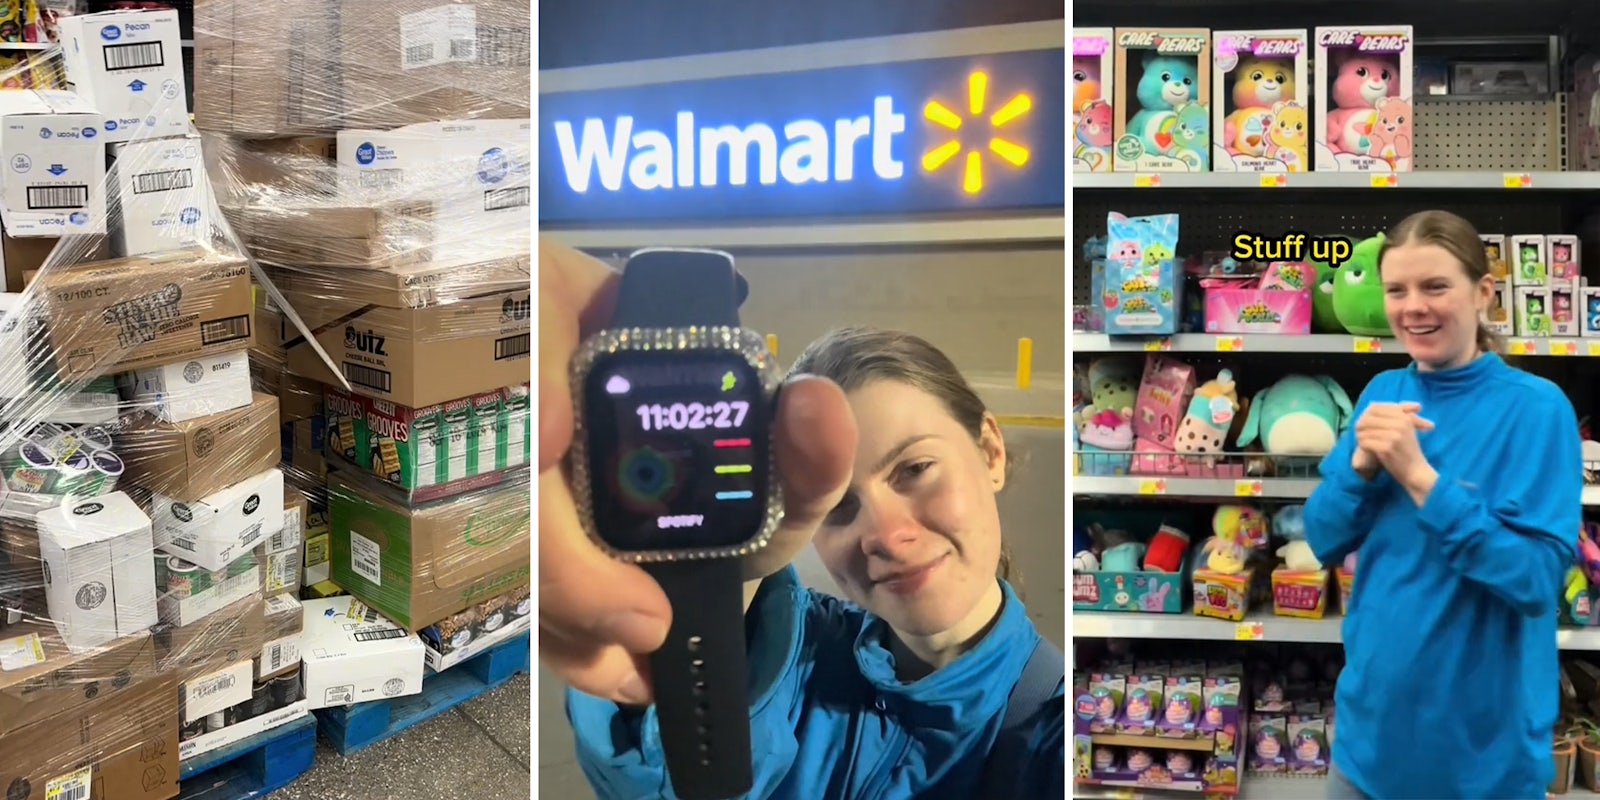 Woman walks into Walmart and works a 9-hour shift. She’s not an employee